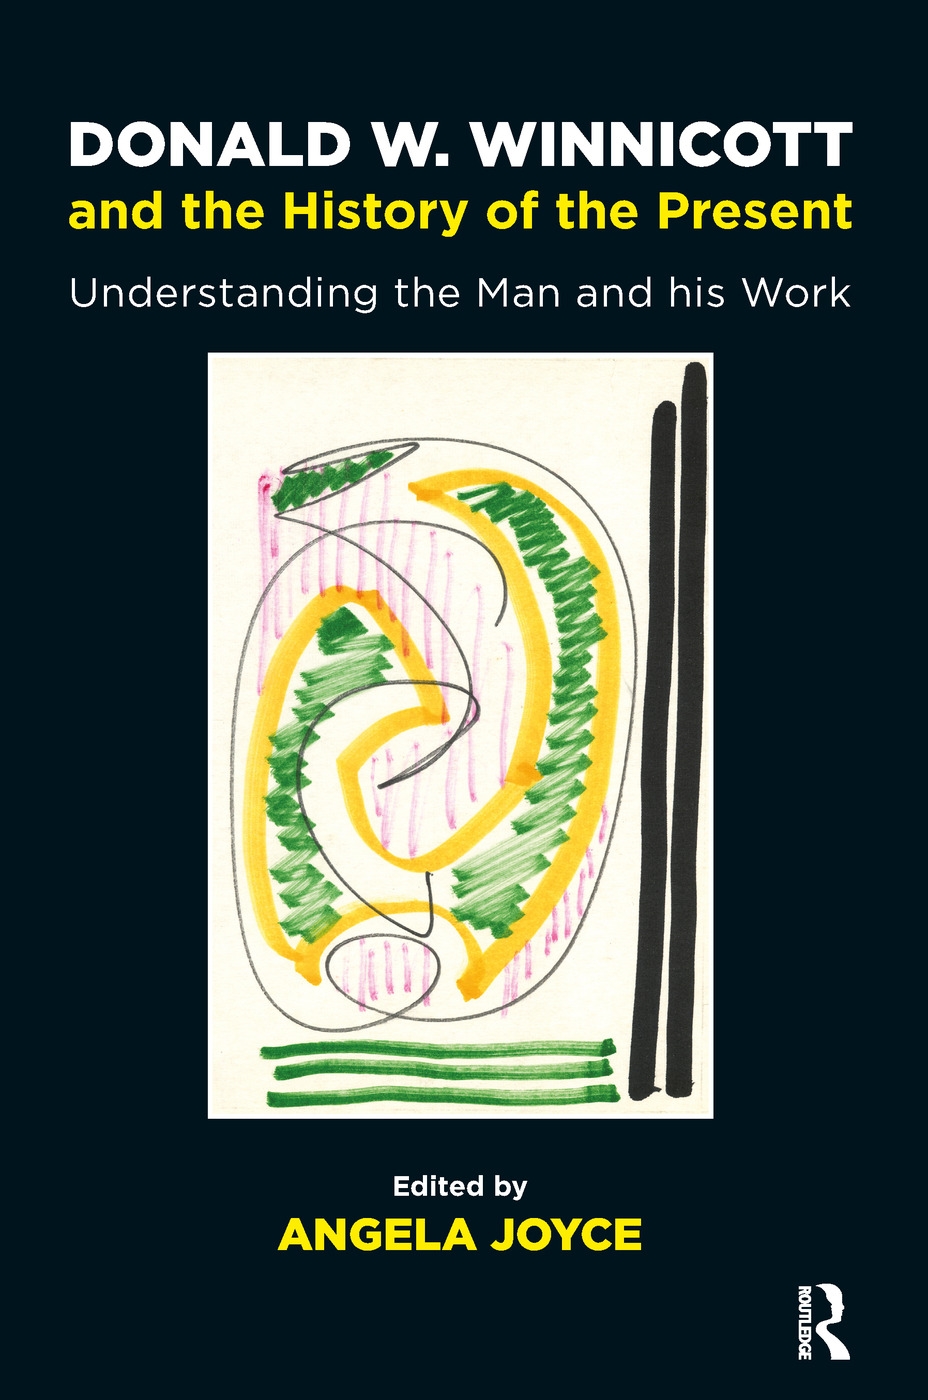 Donald W. Winnicott and the History of the Present: Understanding the Man and His Work